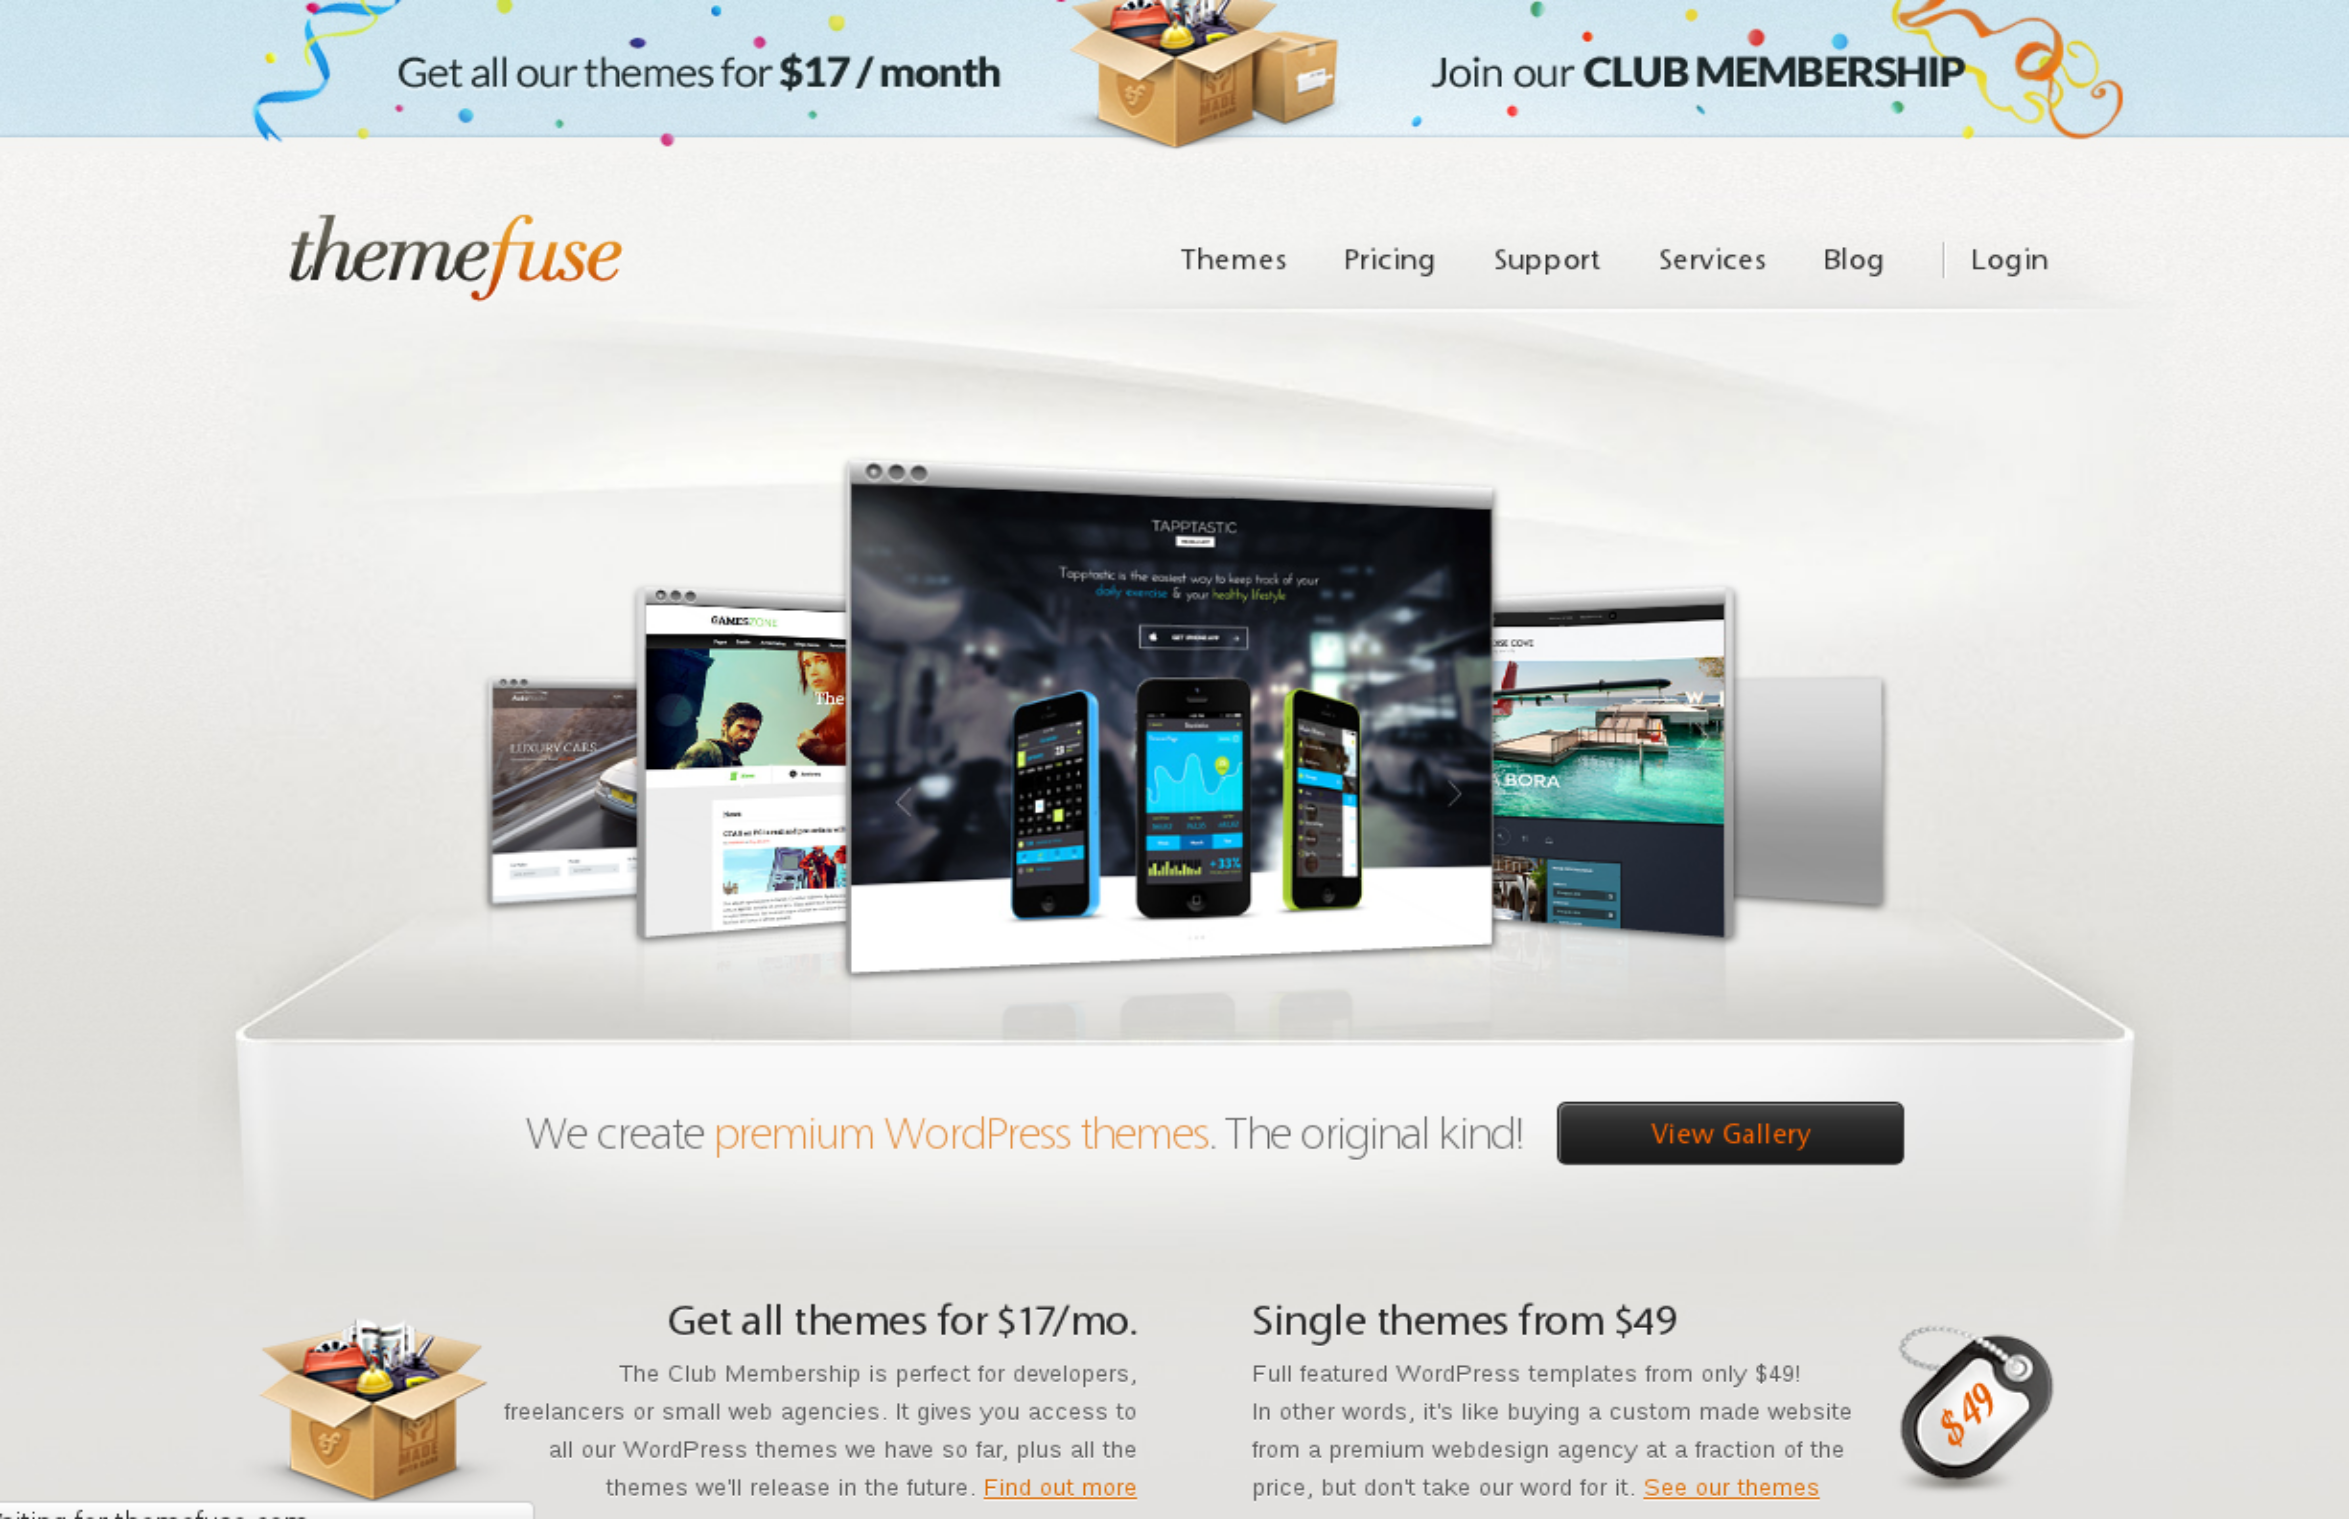 Themefuse WordPress Theme Club - only Best wordpress themes and Support